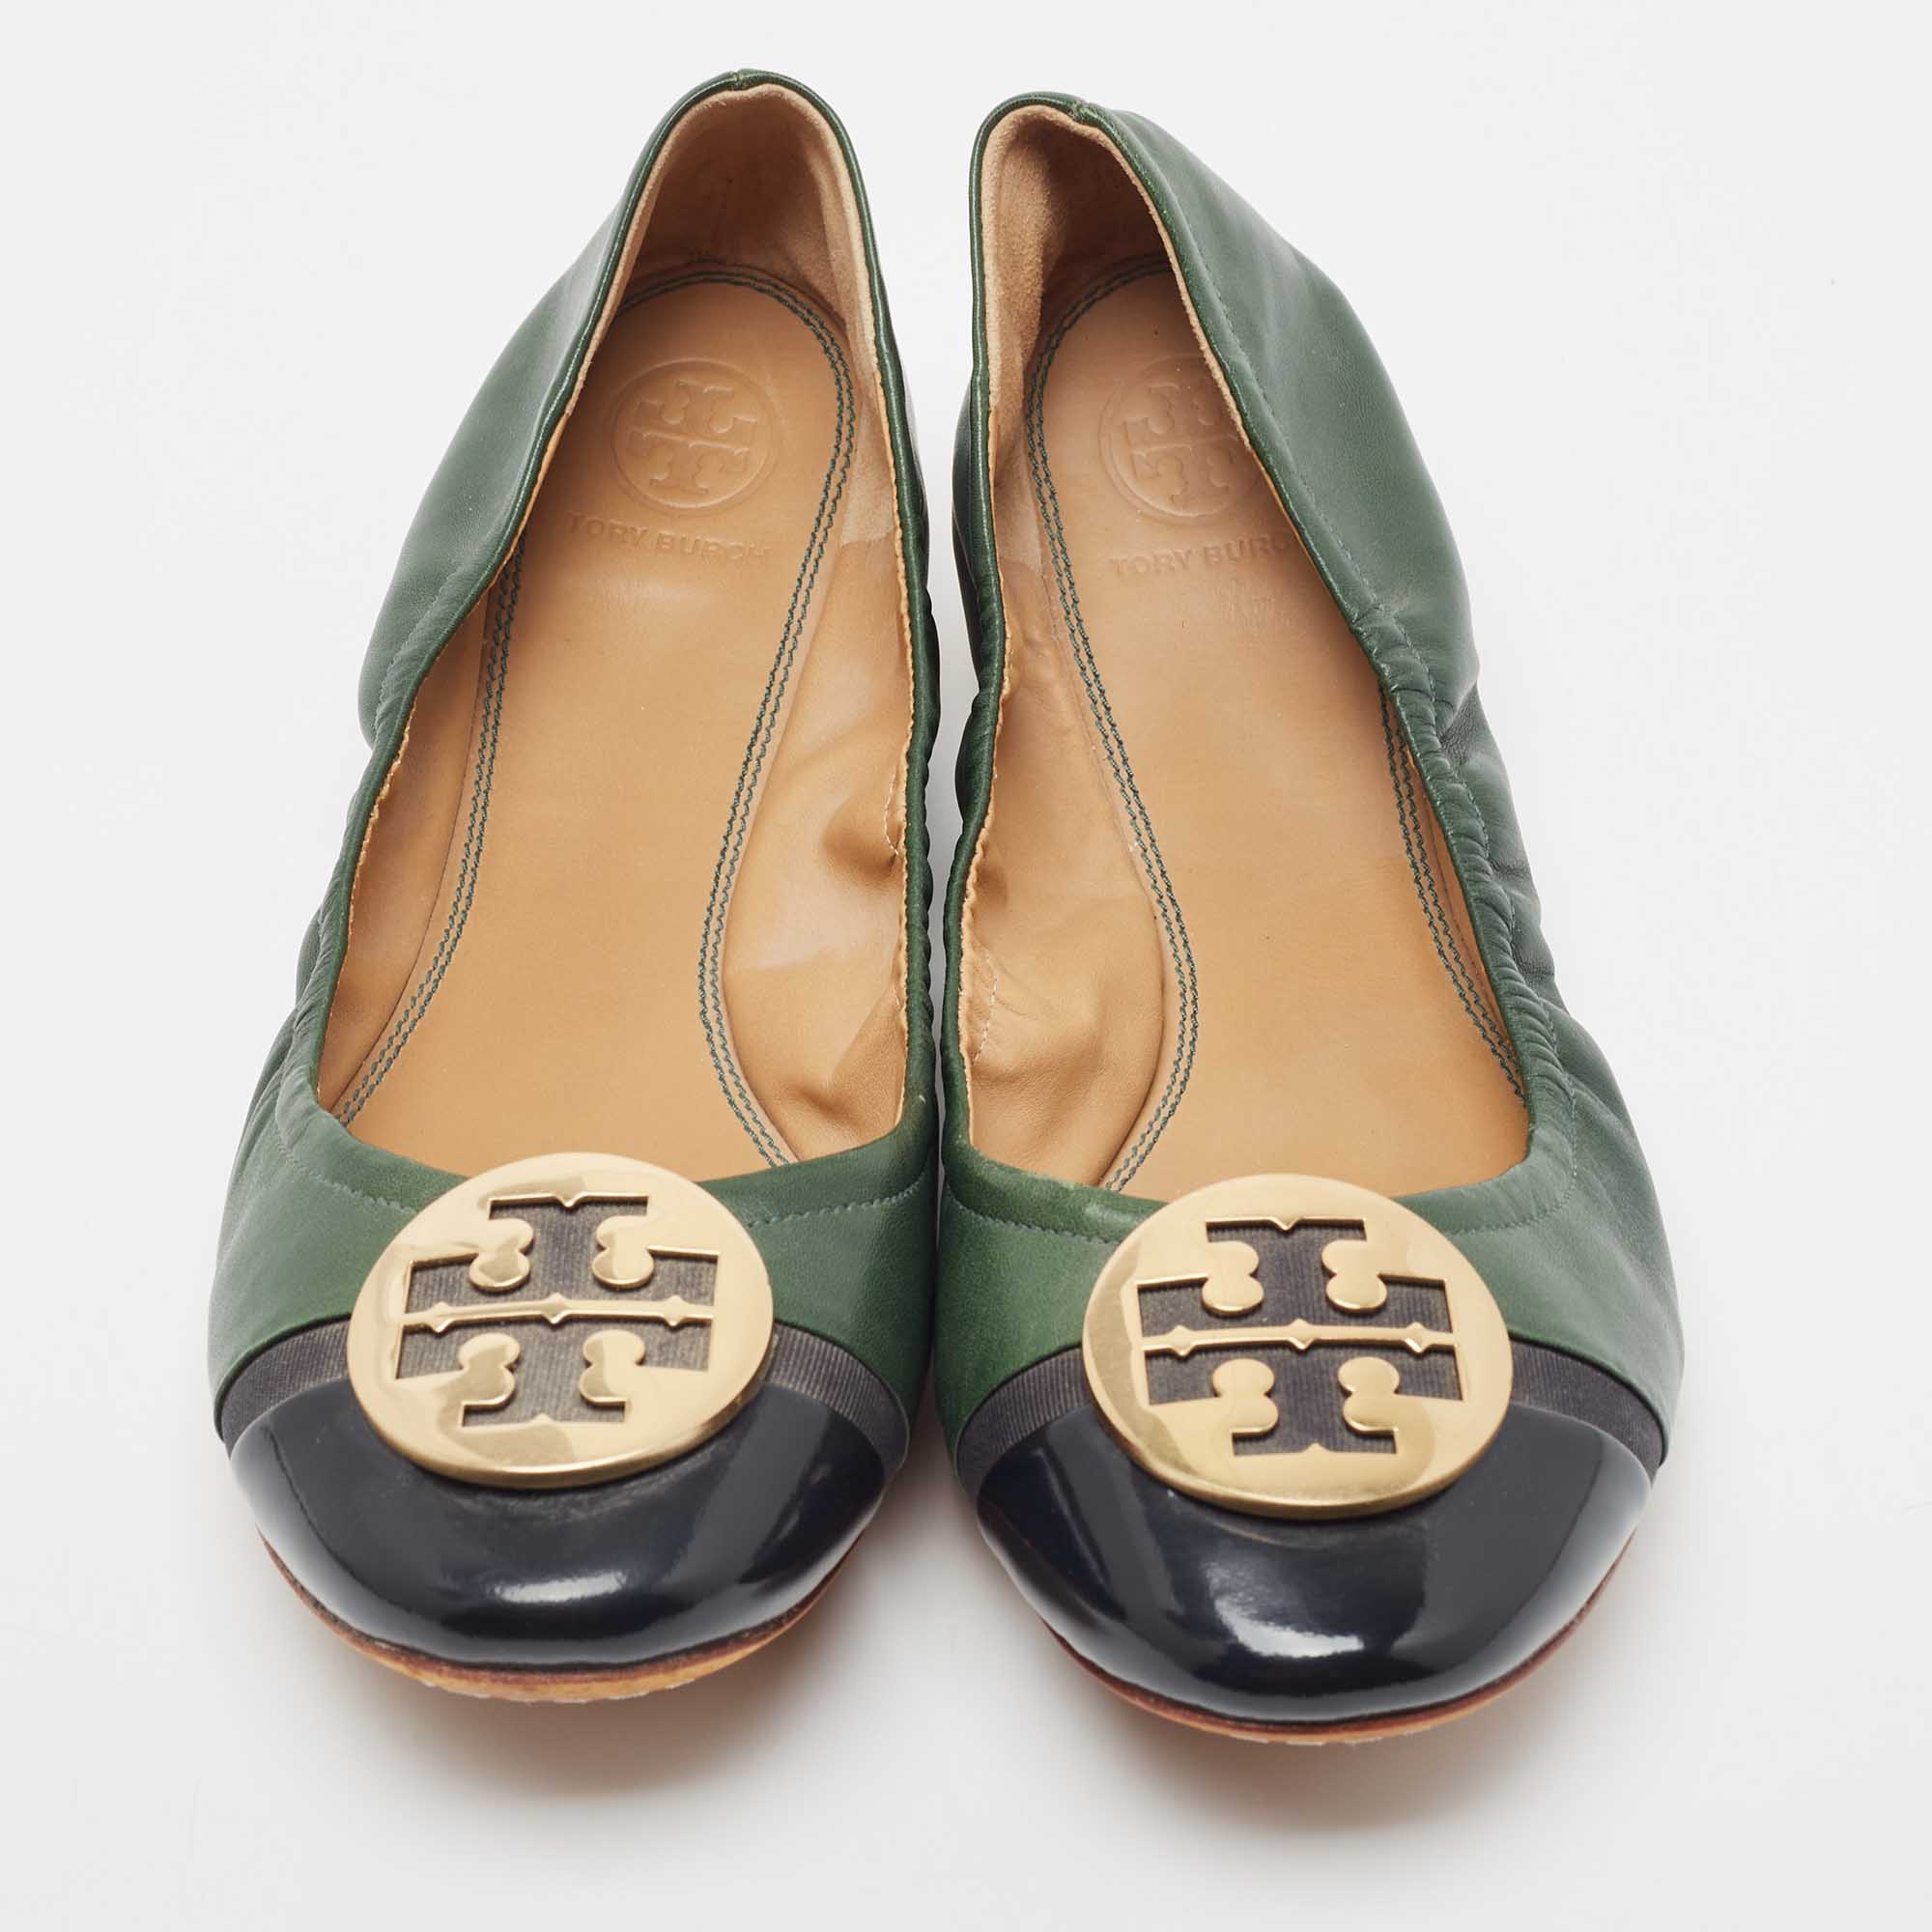 Tory Burch Green/Black Leather And Patent Leather Cap Toe Ballet Flats Size 40